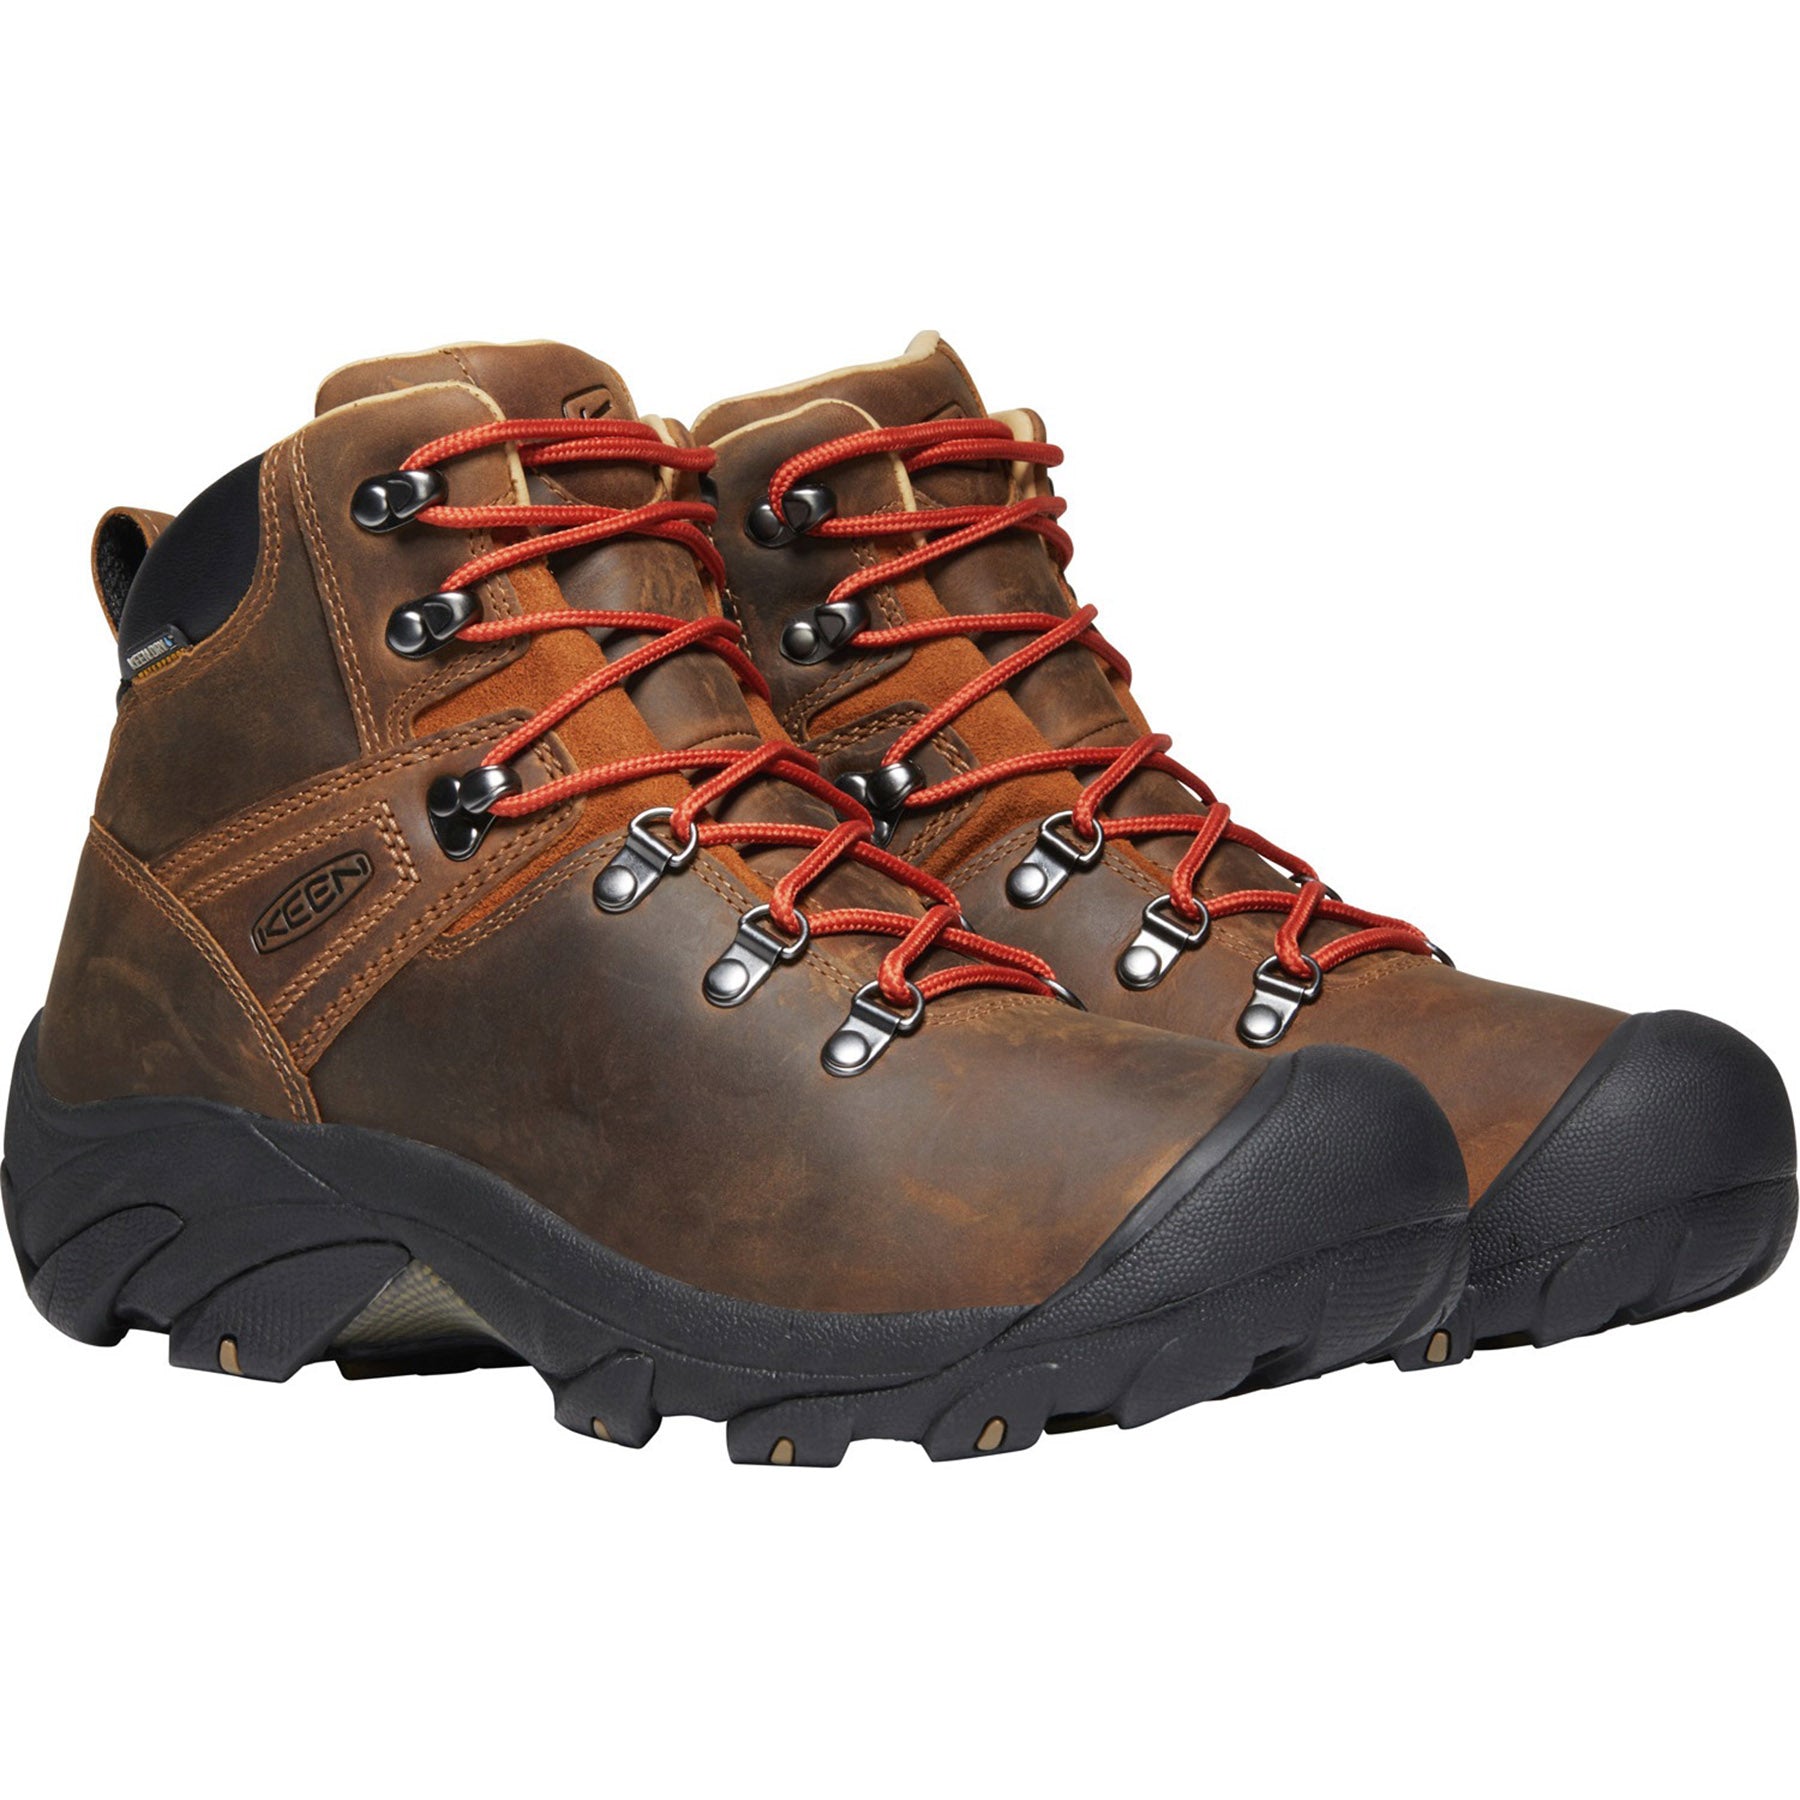 a pair of men's pyrenees hiking boots